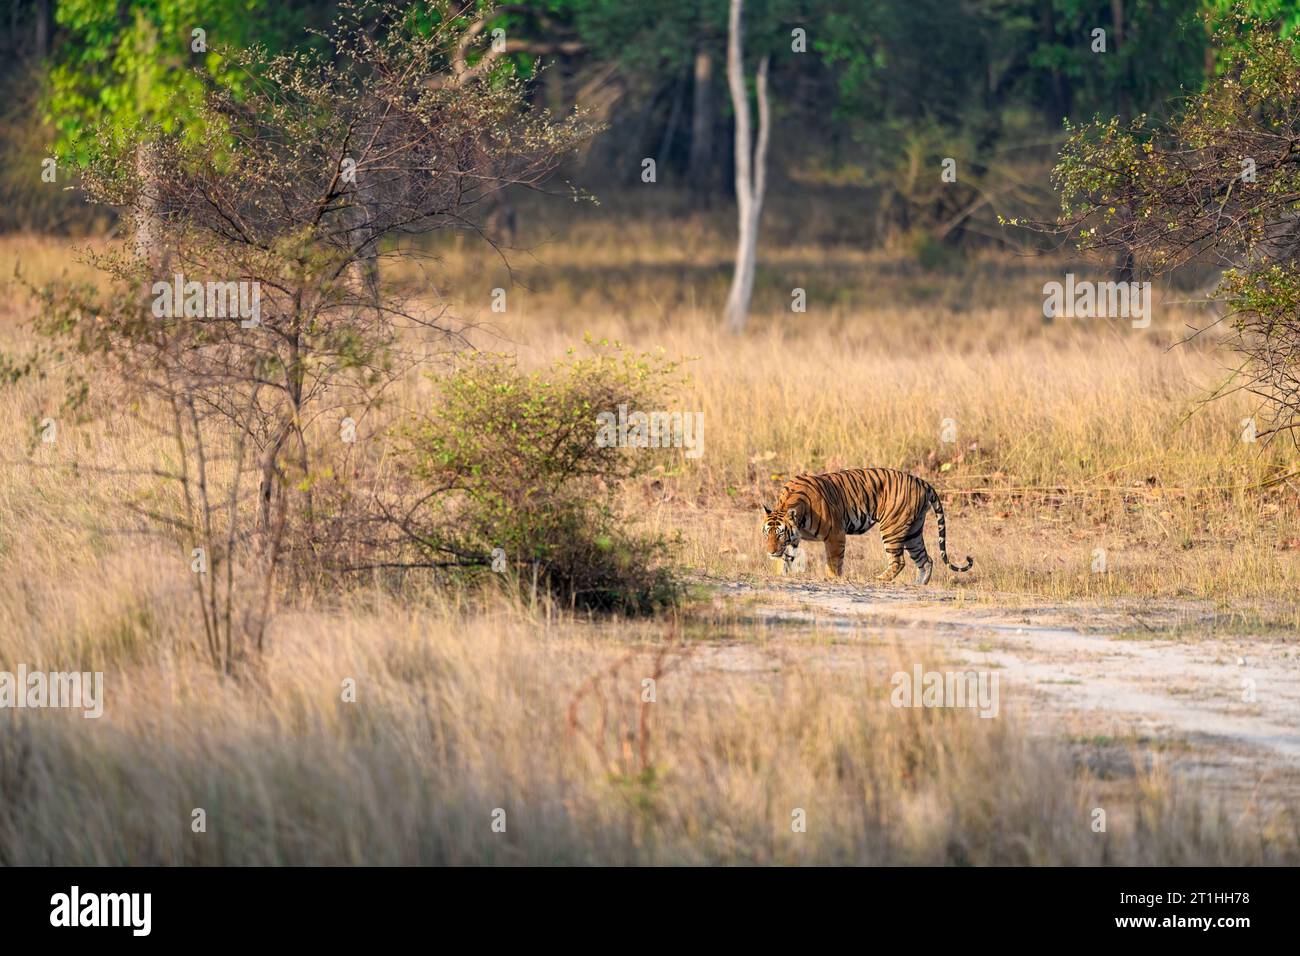 Habitat image of a male tiger moving through a dry forest at Tala zone of Bandhavgarh tiger reserve Stock Photo